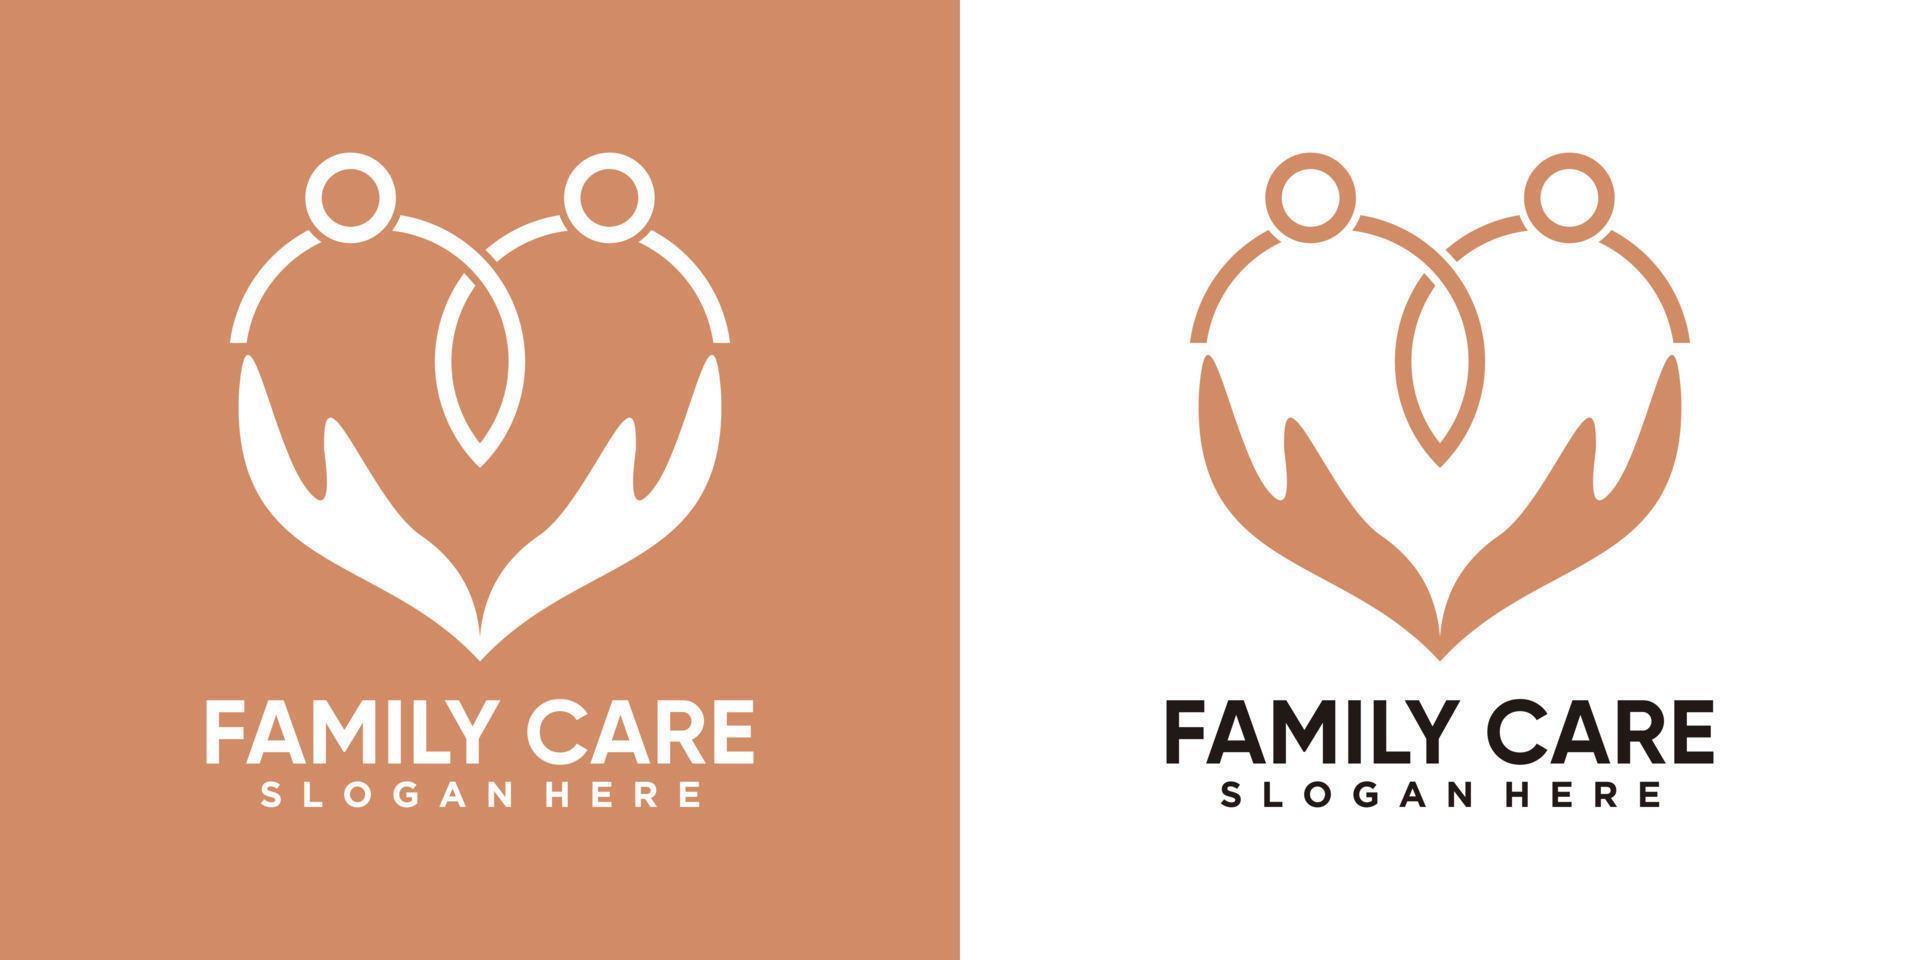 Family care logo design with creative element style vector